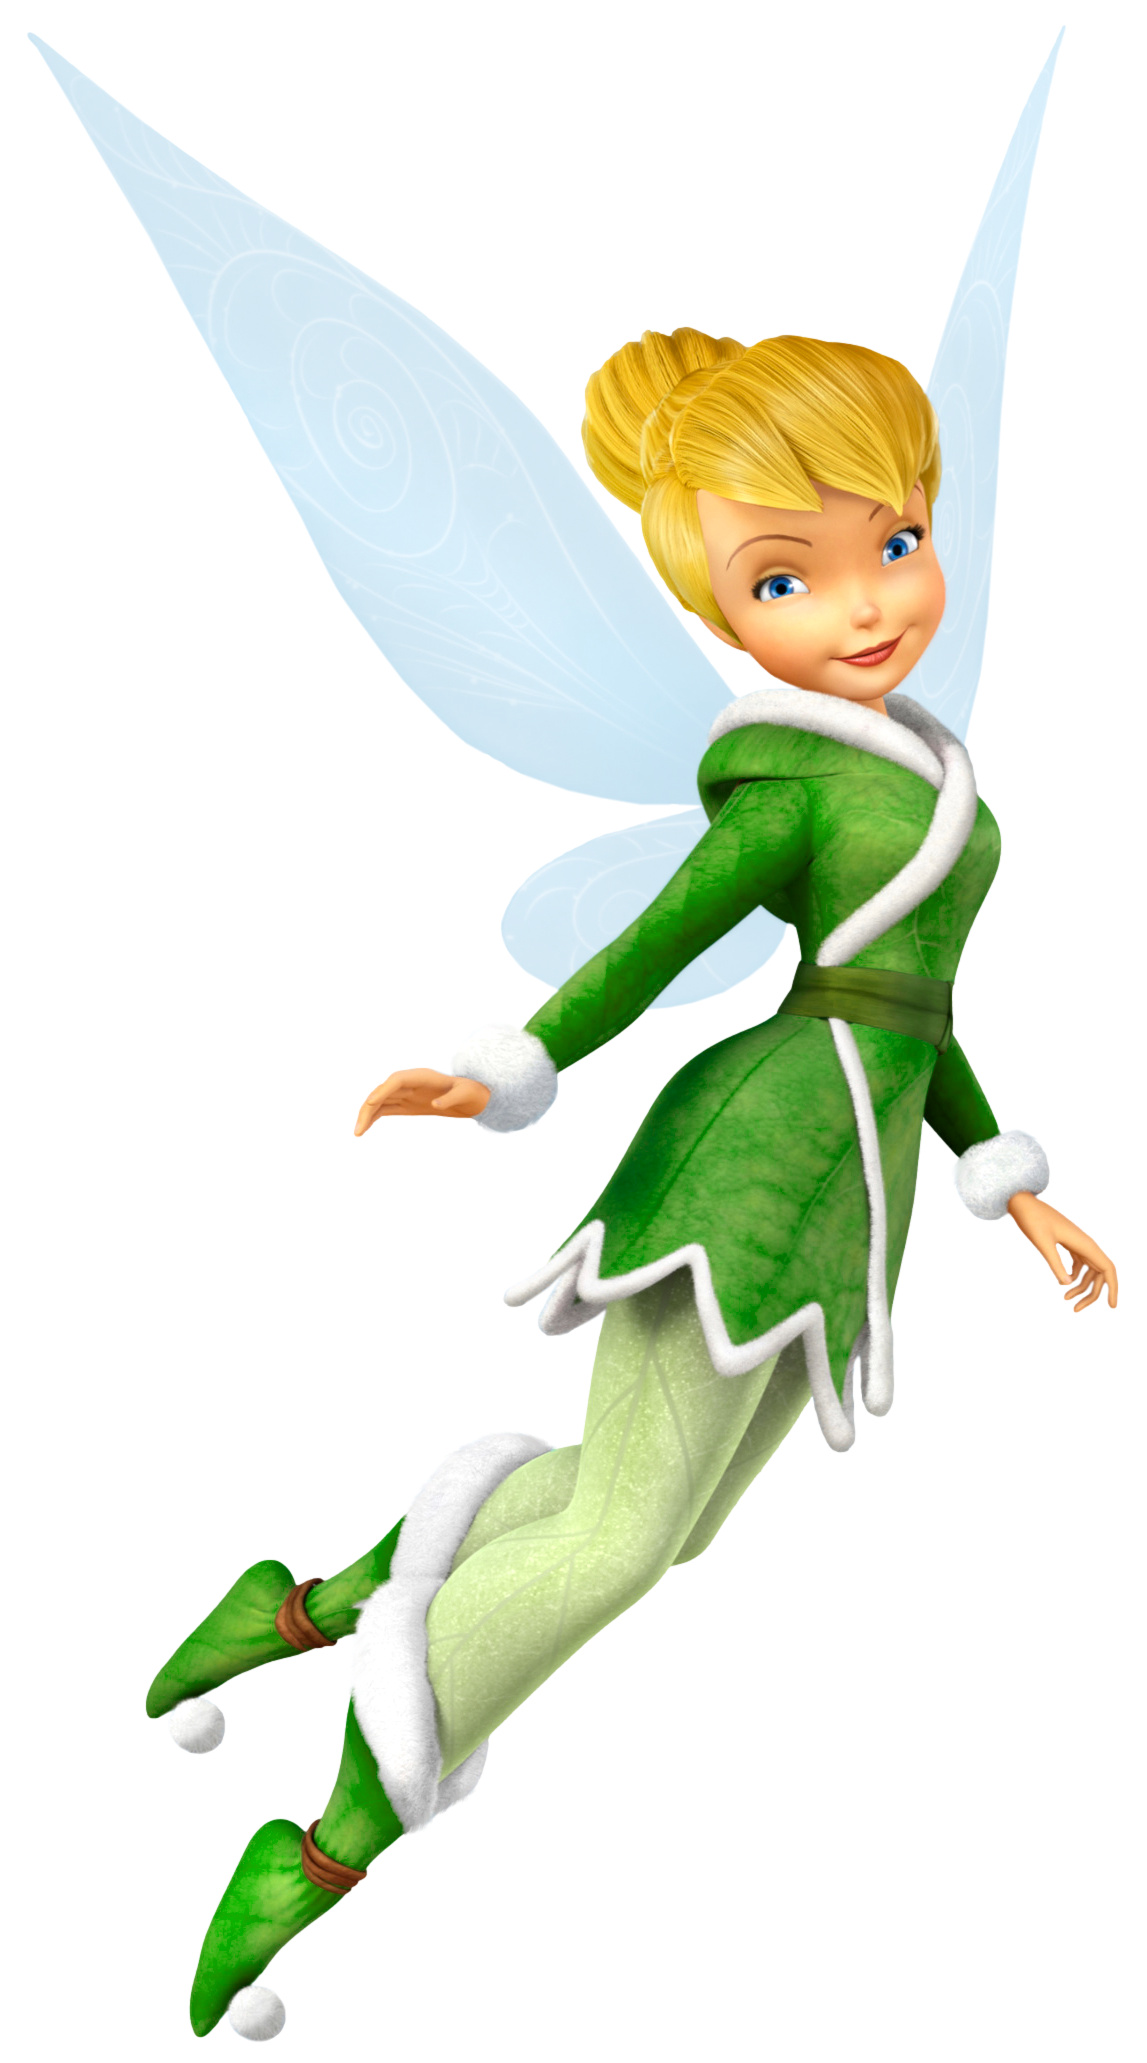 Tinker Bell fairy PNG, High-quality cartoon images, Transparent backgrounds, Disney fairies, 1150x2070 HD Phone